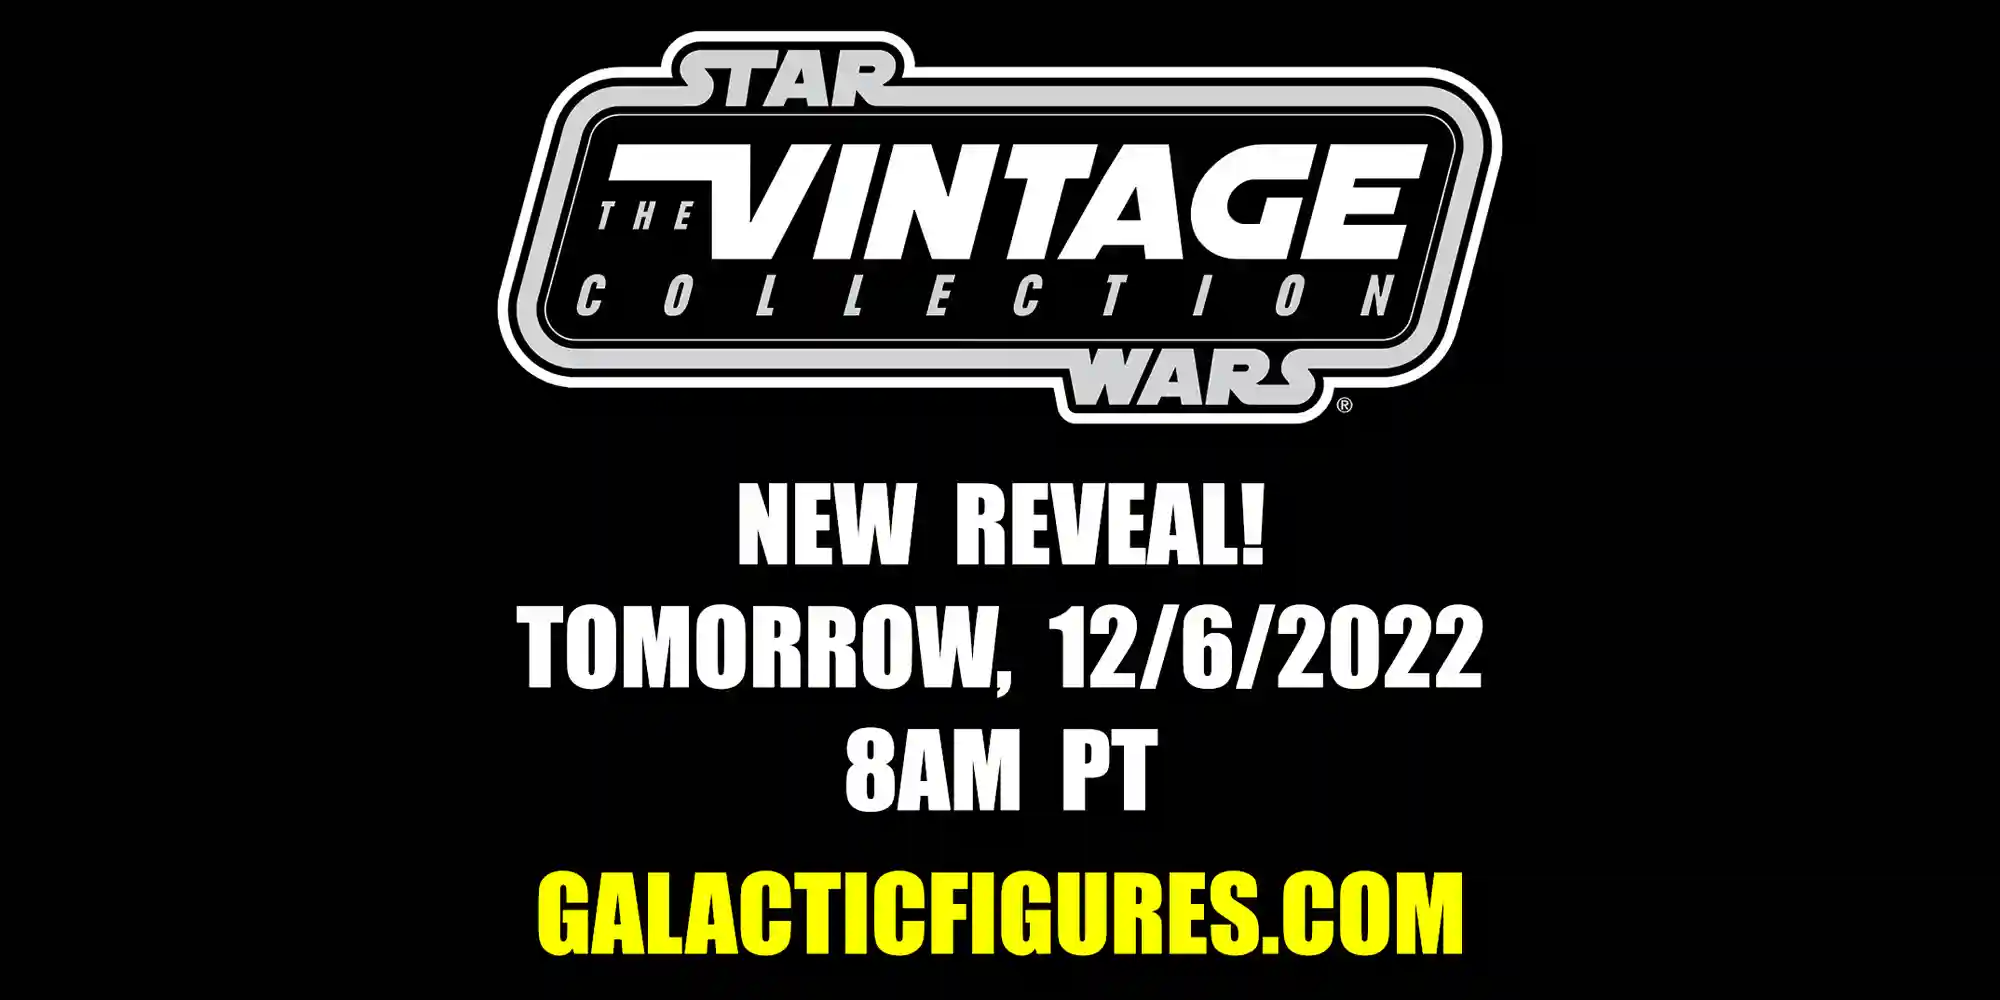 New TVC Reveal On 12/6/2022!